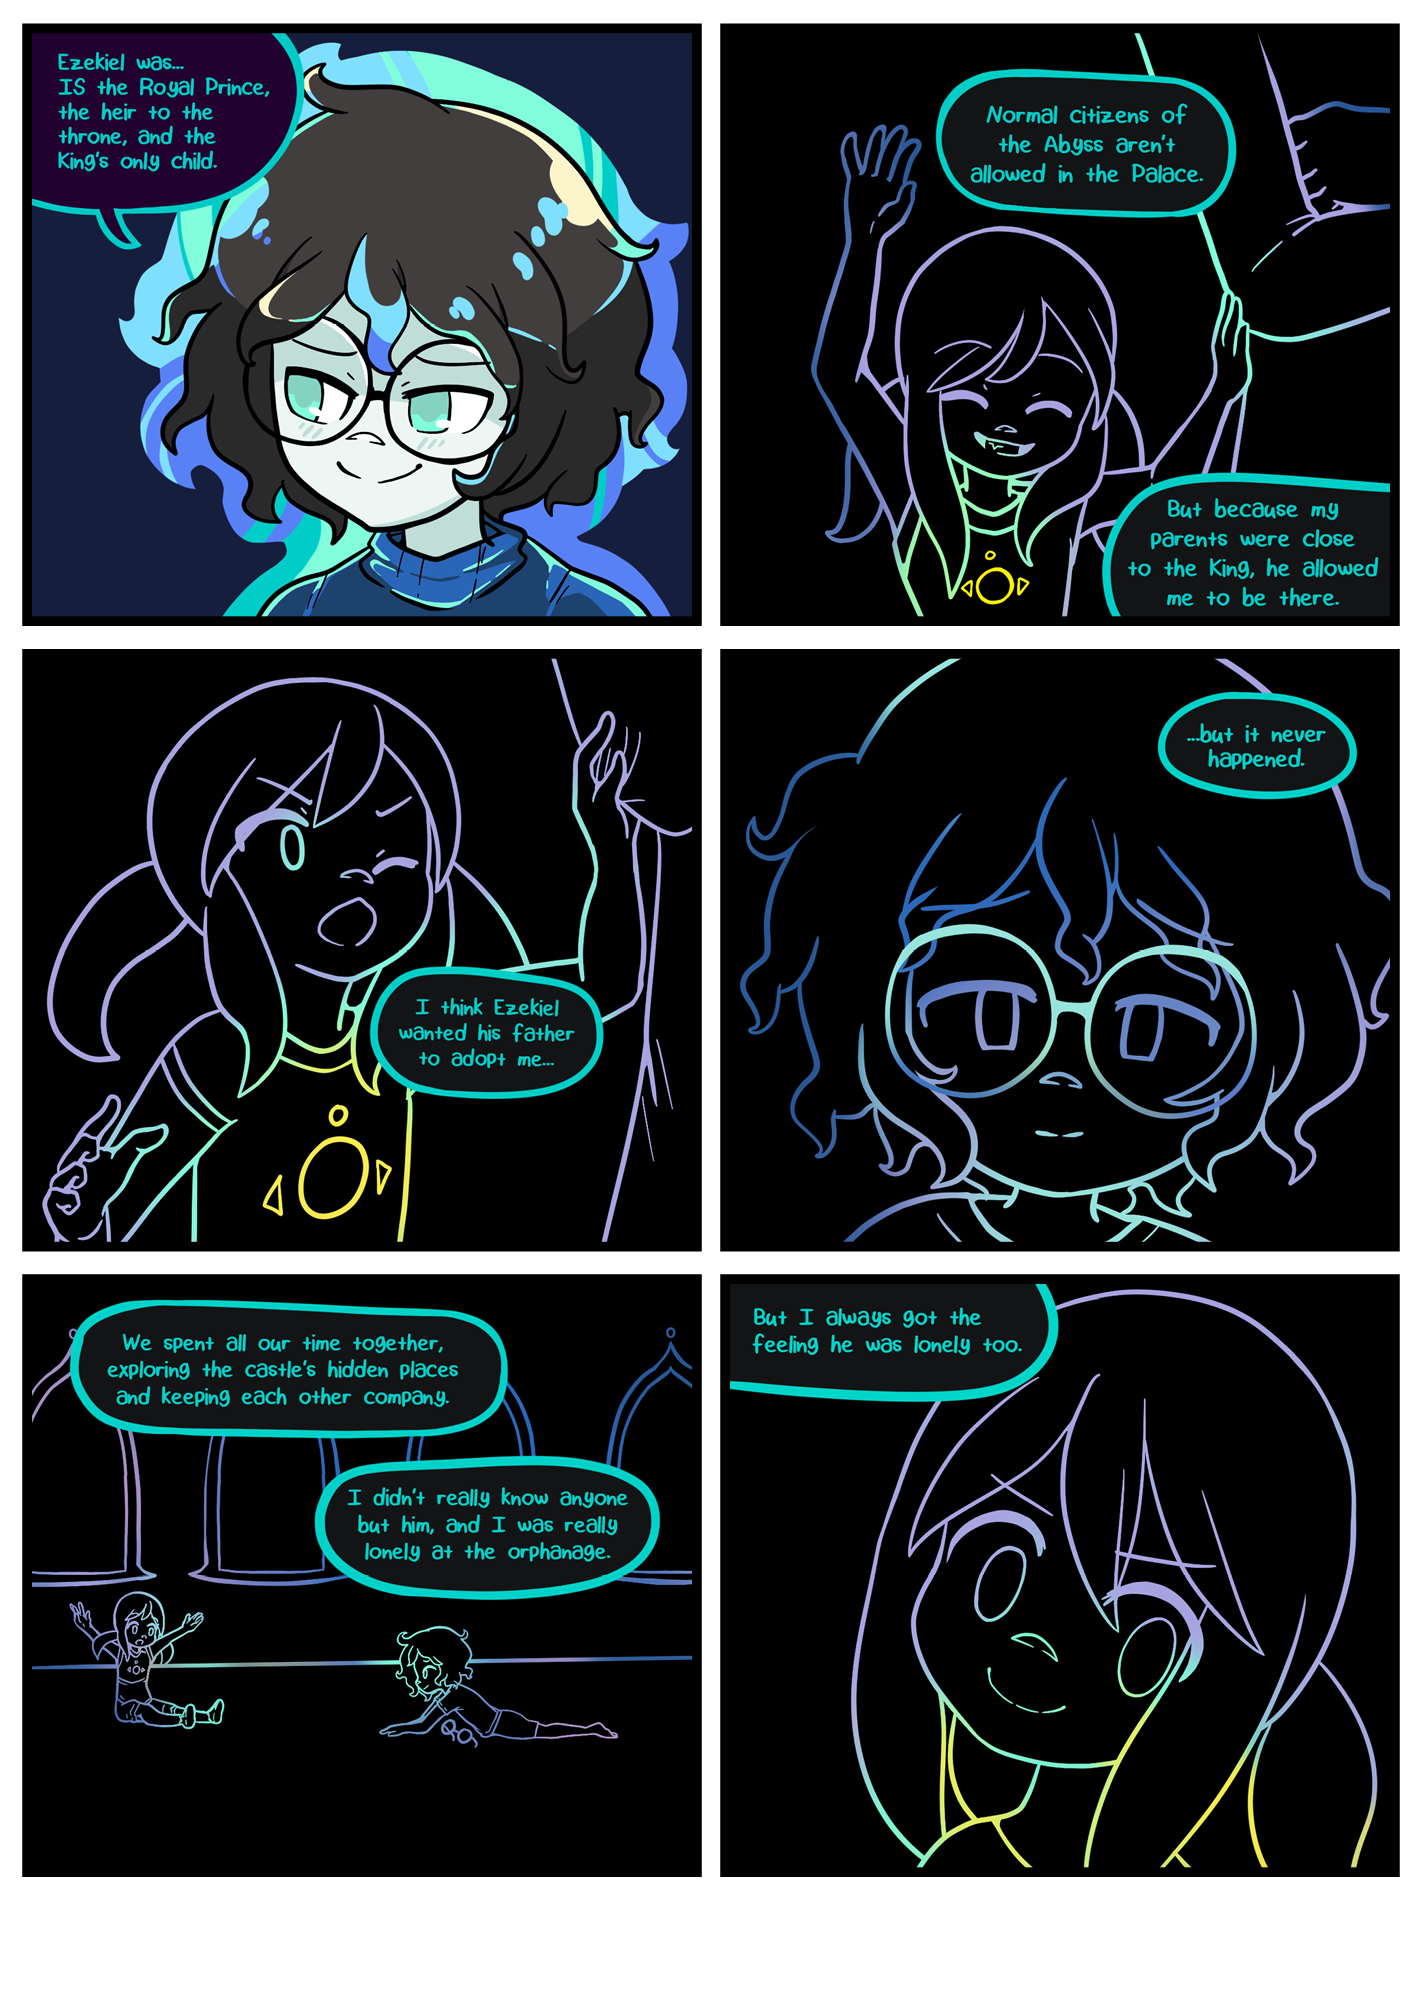 Seasick the underwater adventure comic, chapter 2 page 57 full page